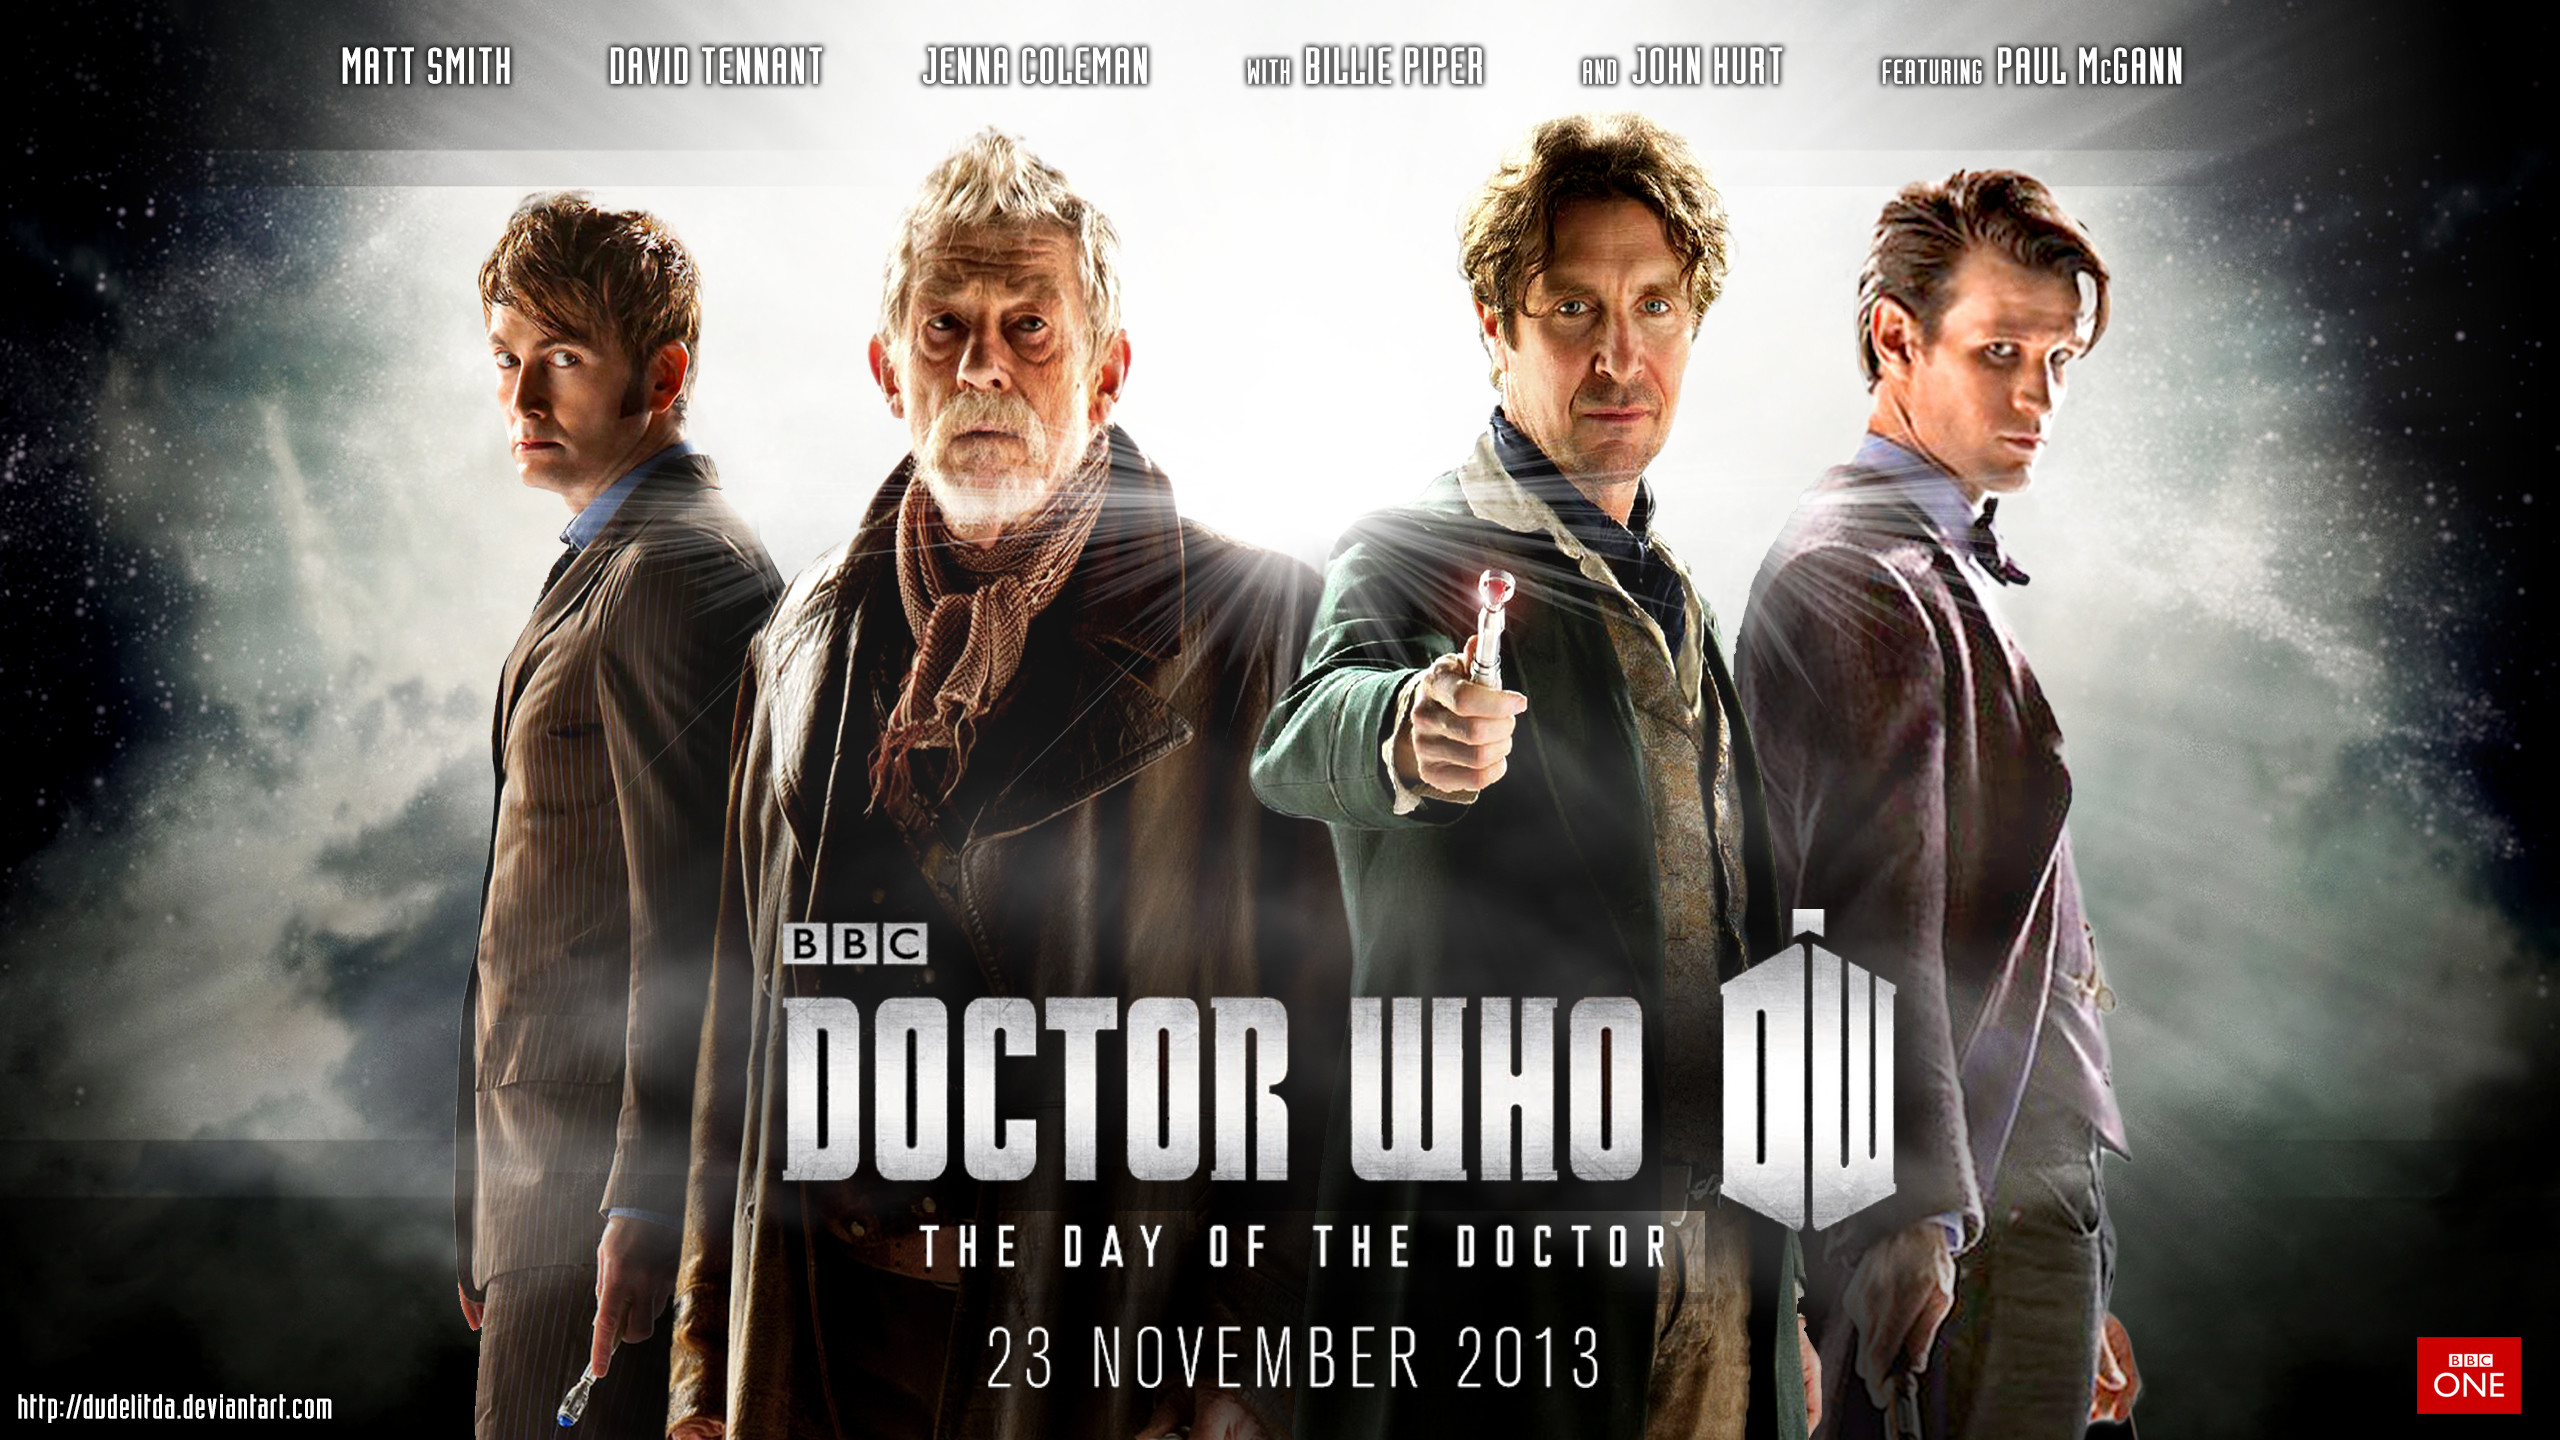 2560x1440 doctor who listen poster - Google Search